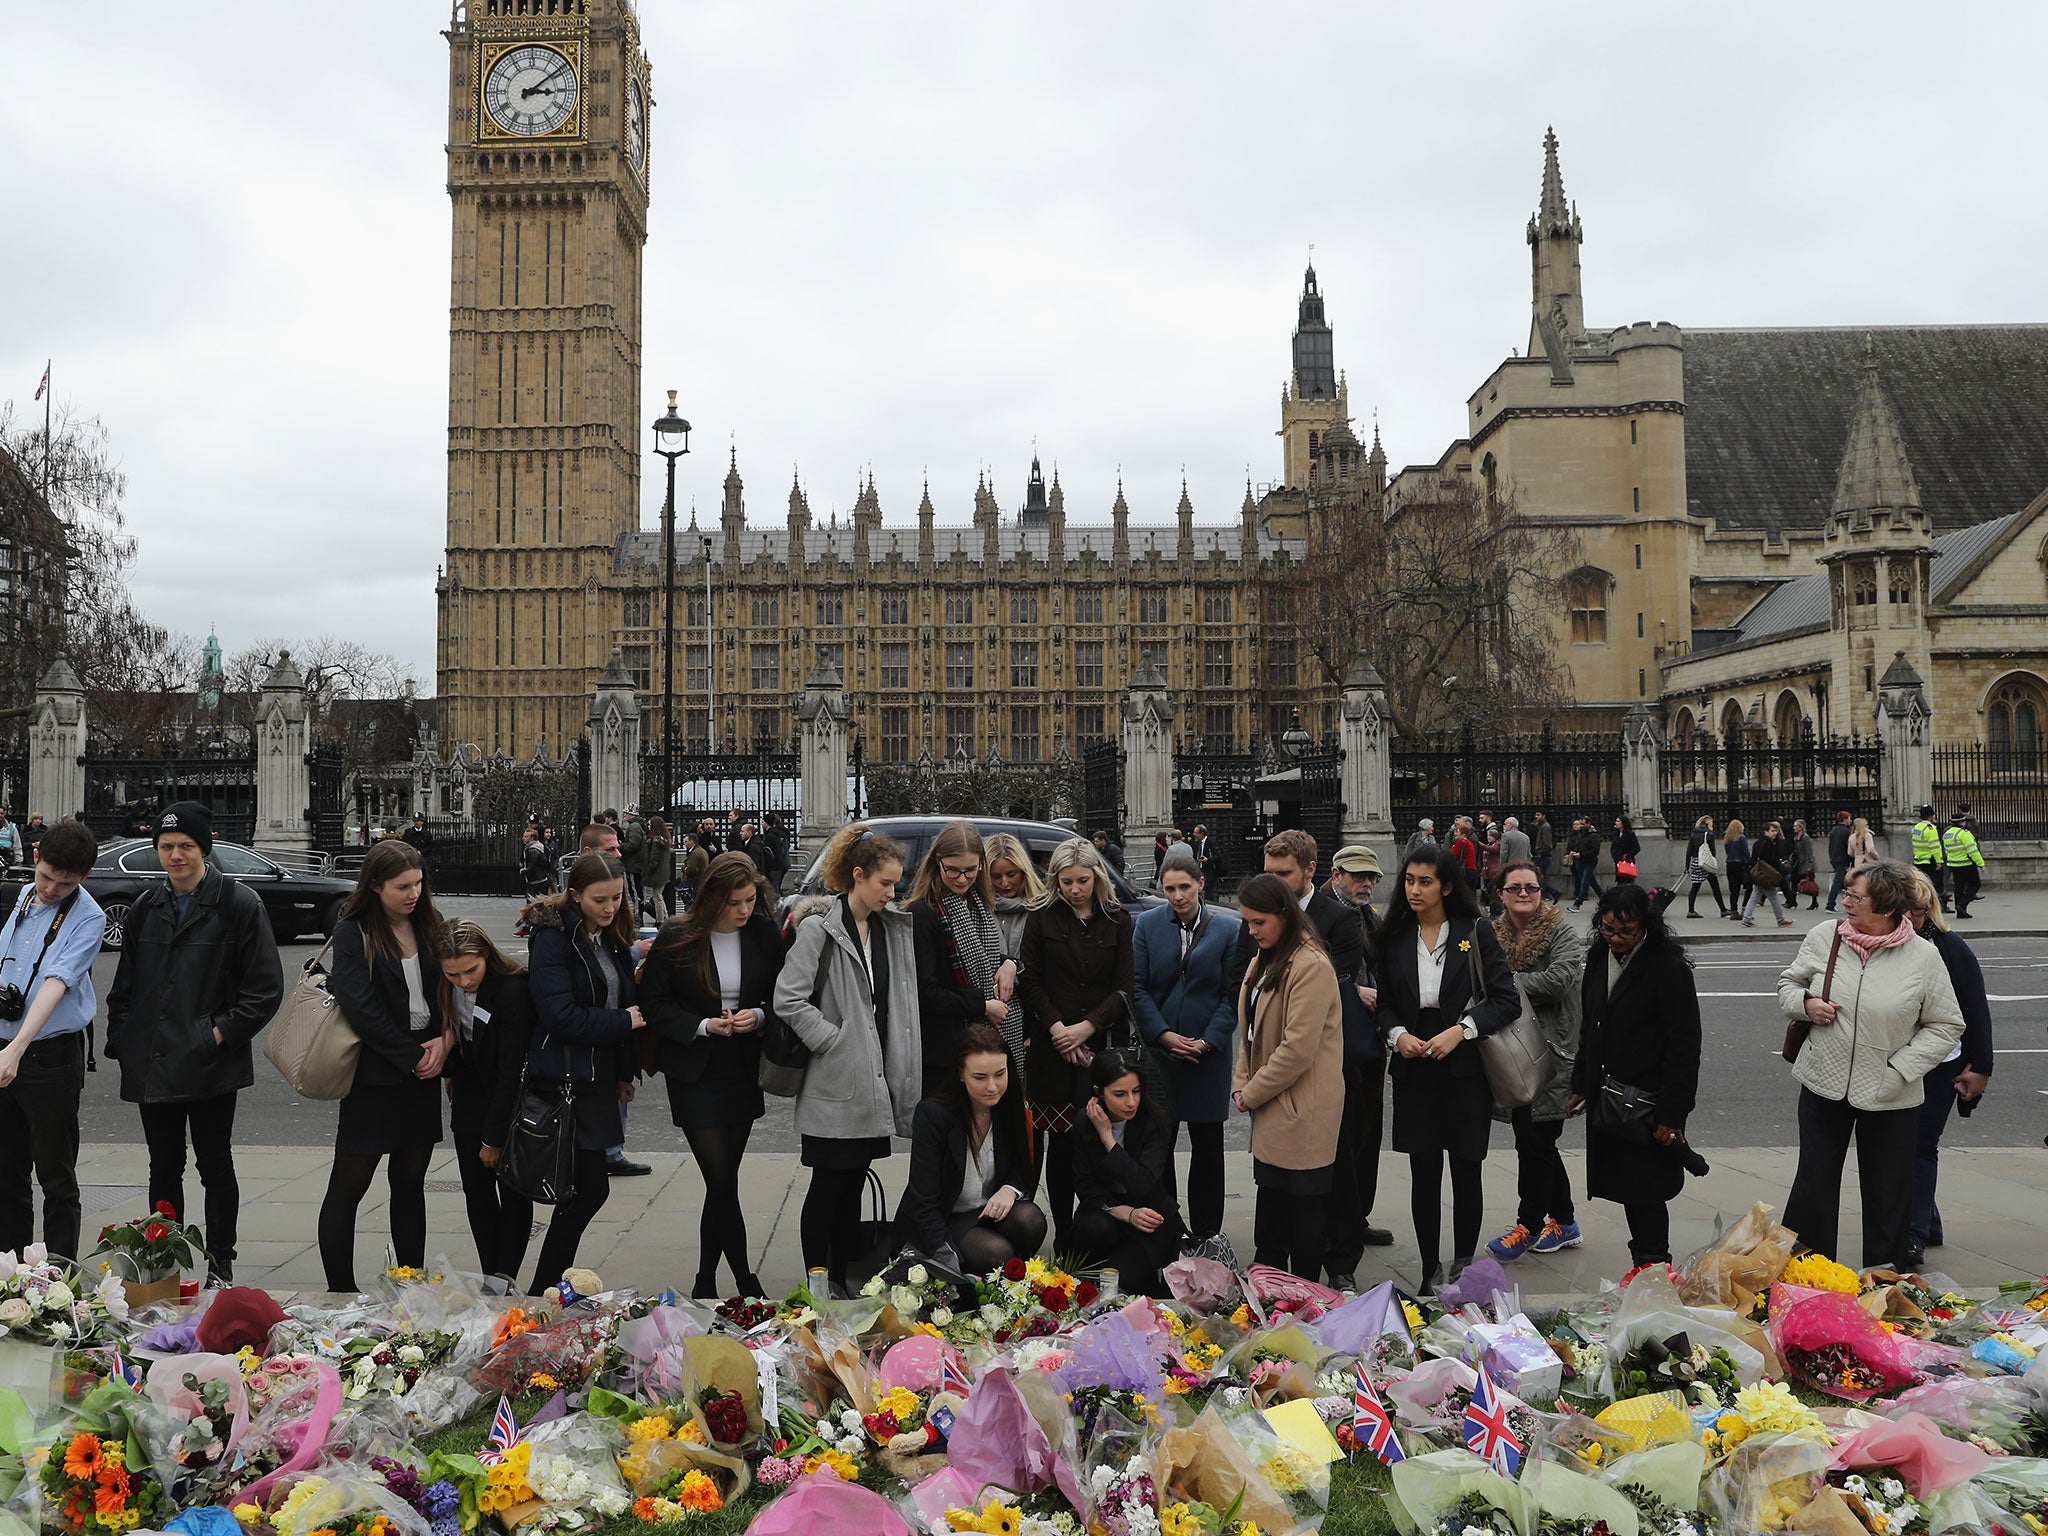 People look at floral tributes left for the victims of the Westminster terrorist attack (file photo)